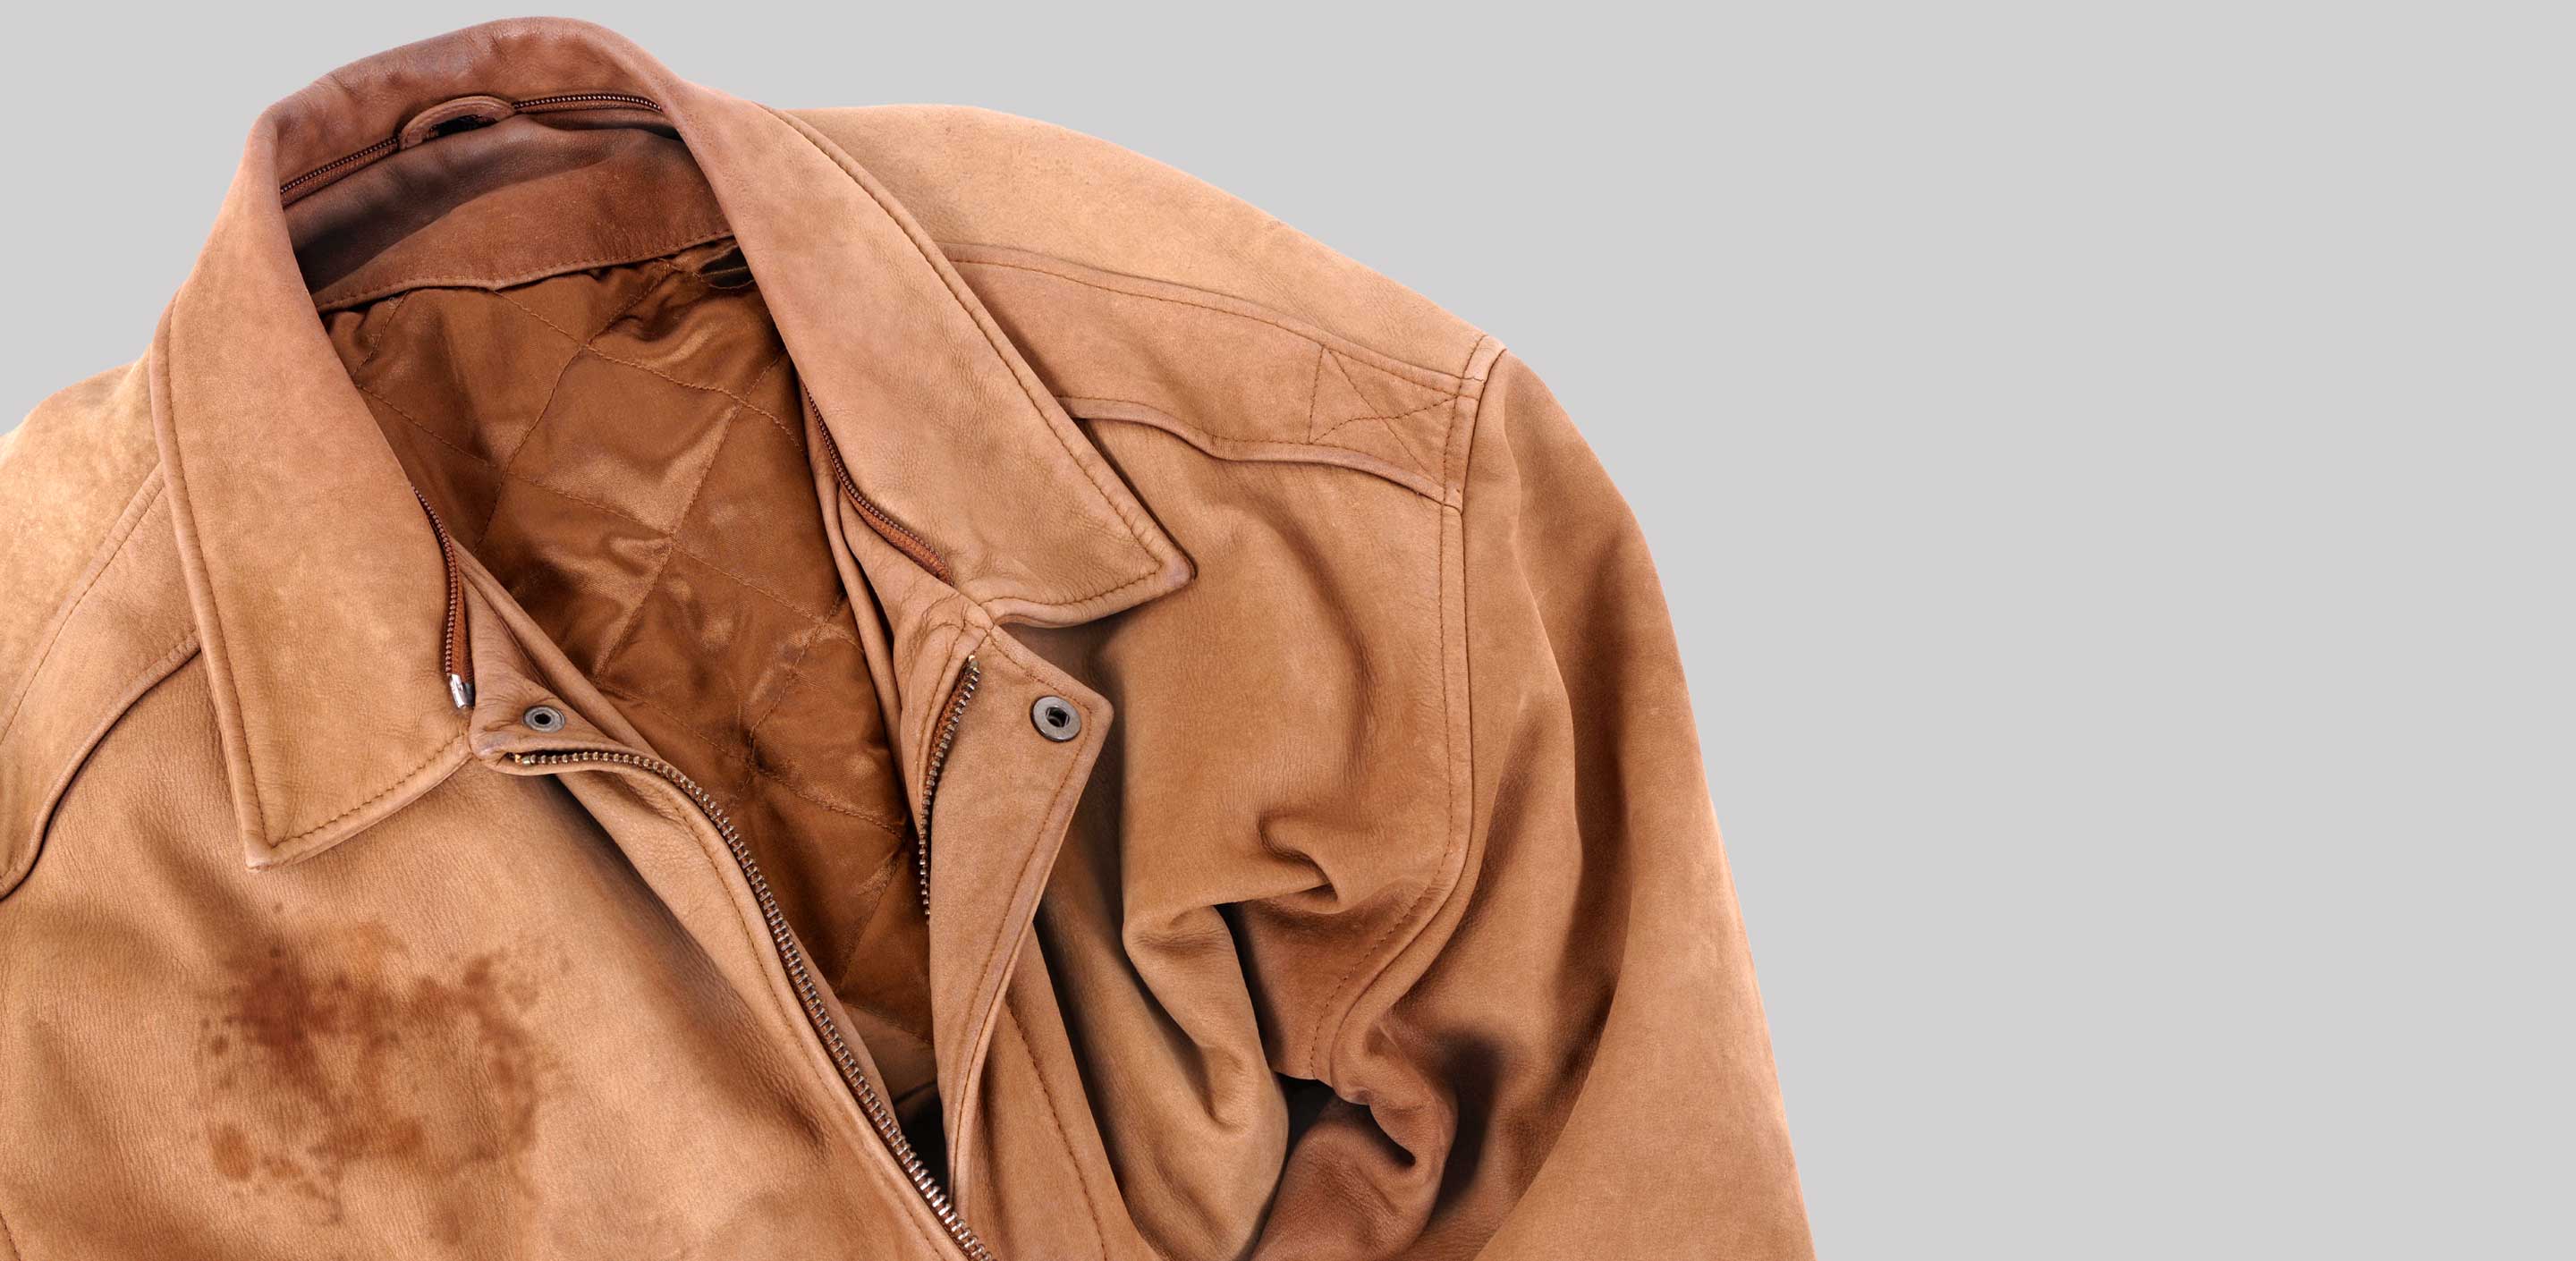 Stain on Leather Jacket